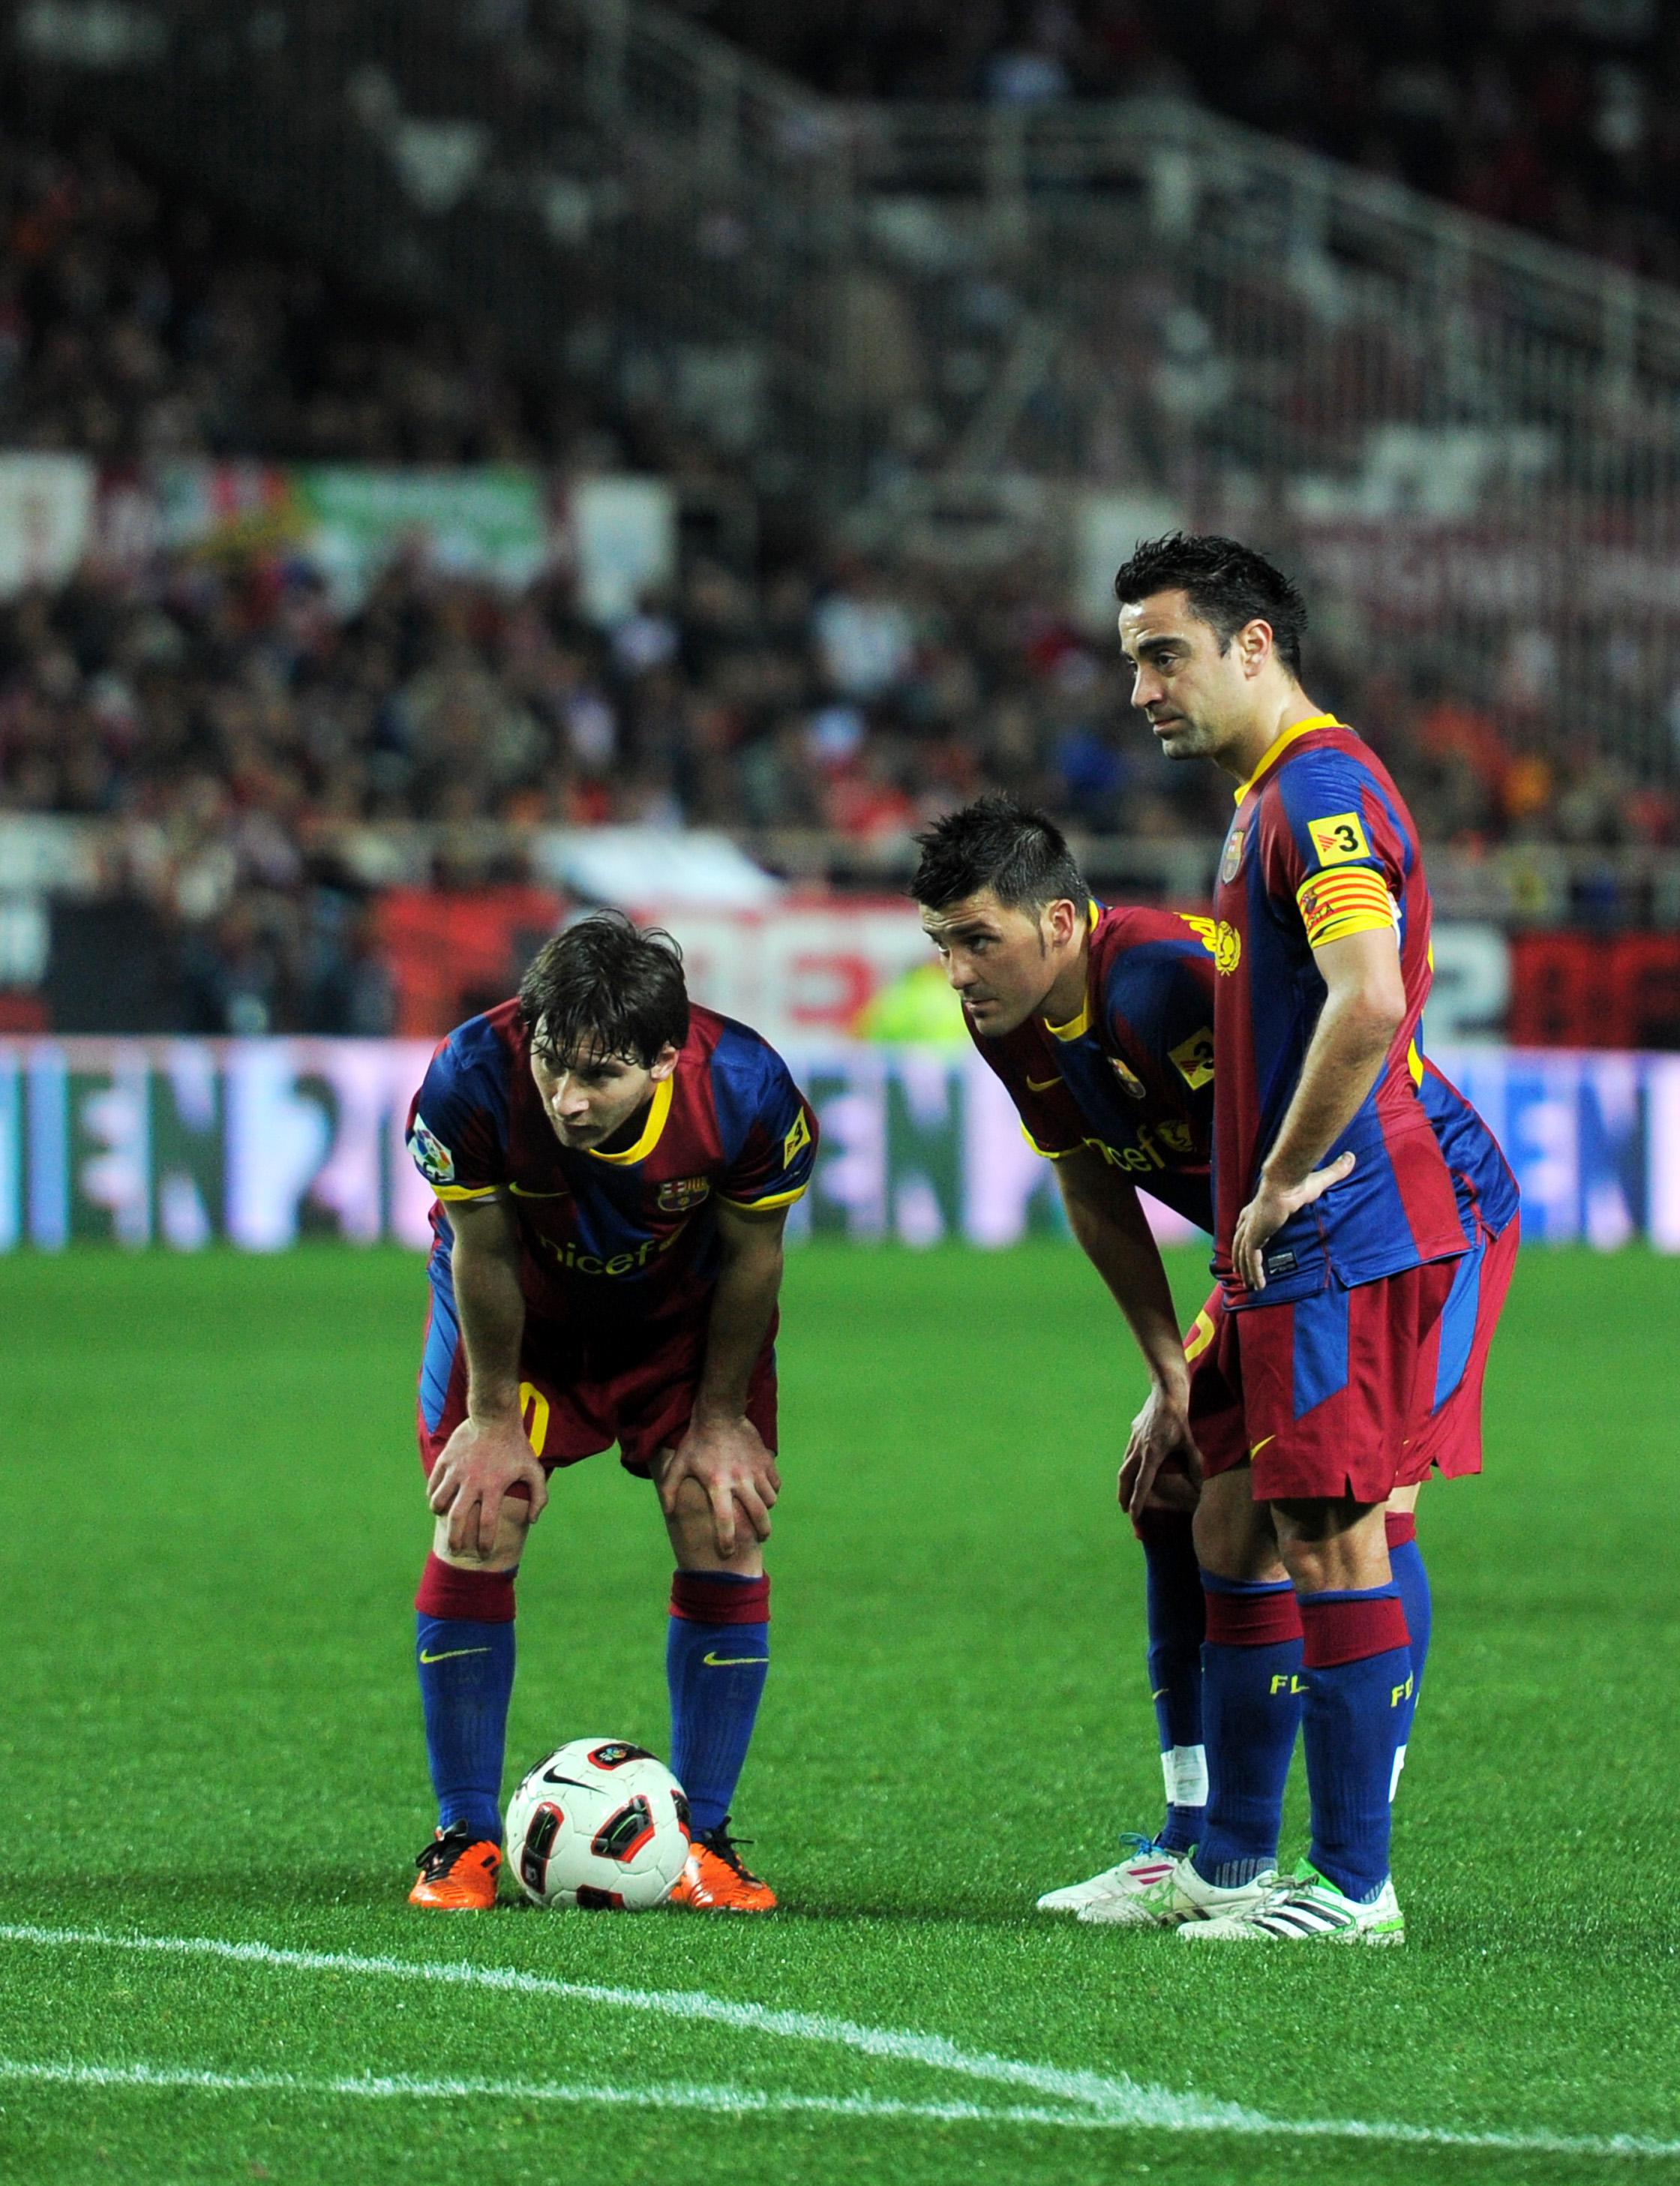 SEVILLE, SPAIN - MARCH 13:  Lionel Messi (L), David Villa (C) and Xavi Hernandez of Barcelona line up a free kick during the la Liga match between Sevilla and Barcelona at Estadio Ramon Sanchez Pizjuan on March 13, 2011 in Seville, Spain.  (Photo by Jaspe